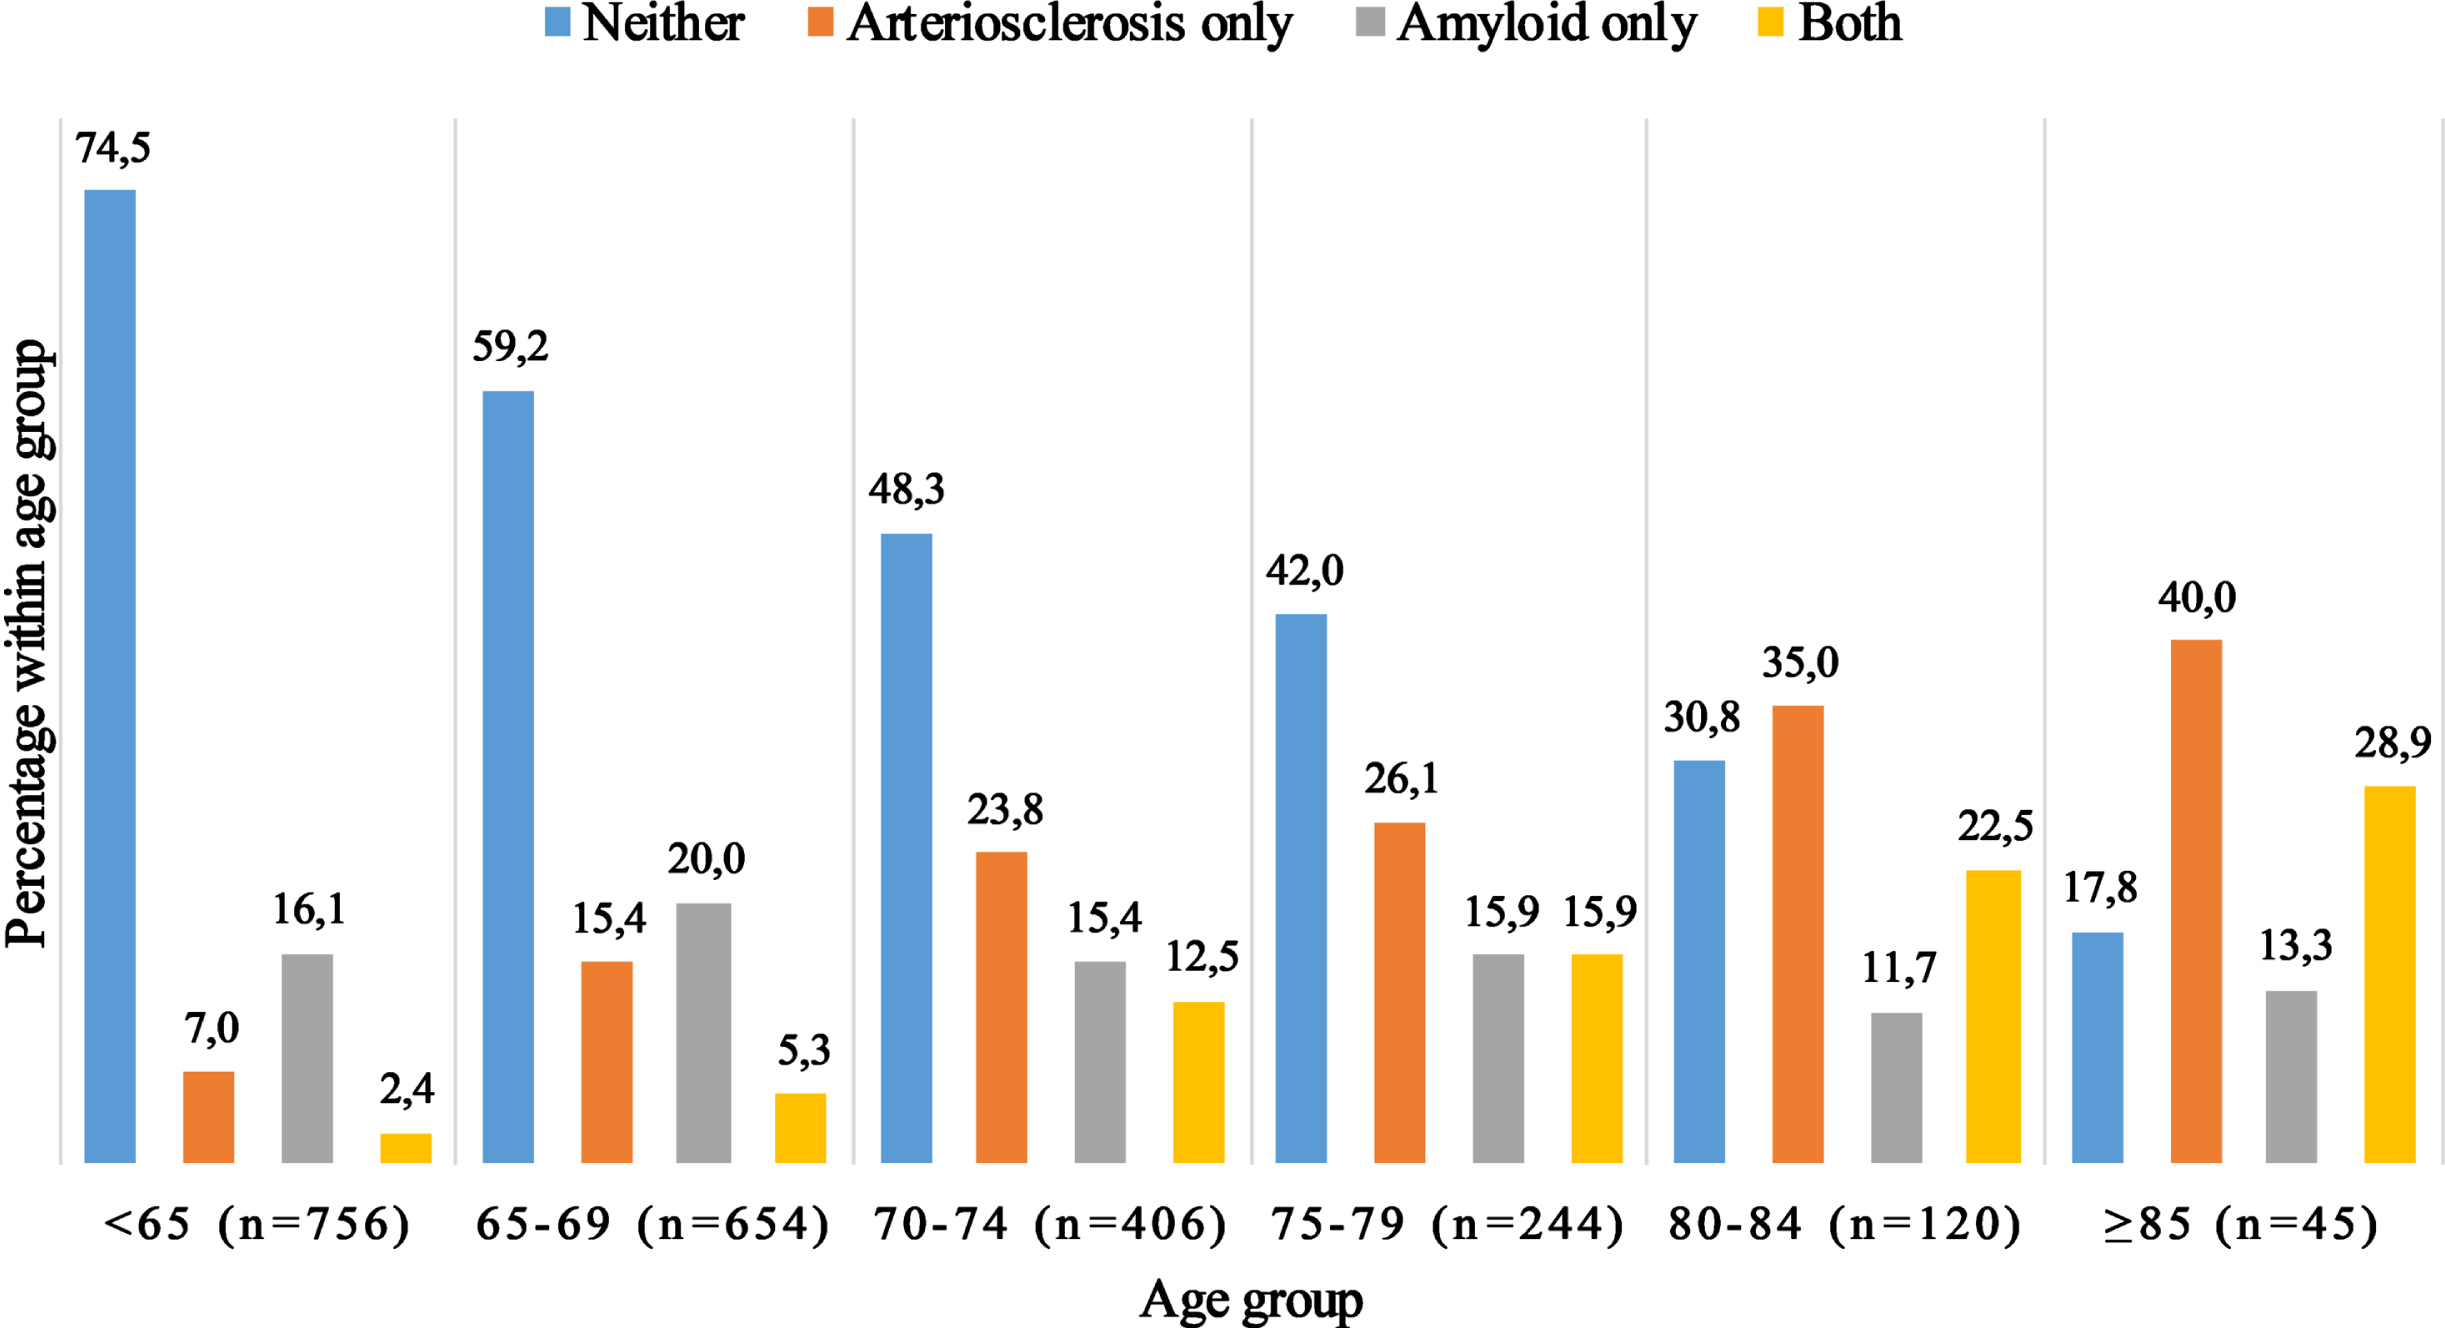 Co-occurrence of arteriosclerosis and amyloid pathology. The figure depicts the number of participants with neither pathology, arteriosclerosis only, amyloid pathology only or co-occurrence of both pathologies, stratified by age groups. Presence of arteriosclerosis was defined as the highest quartile of the C-factor, whereas presence of amyloid was defined as the lowest quartile of the Aβ42/40 ratio.